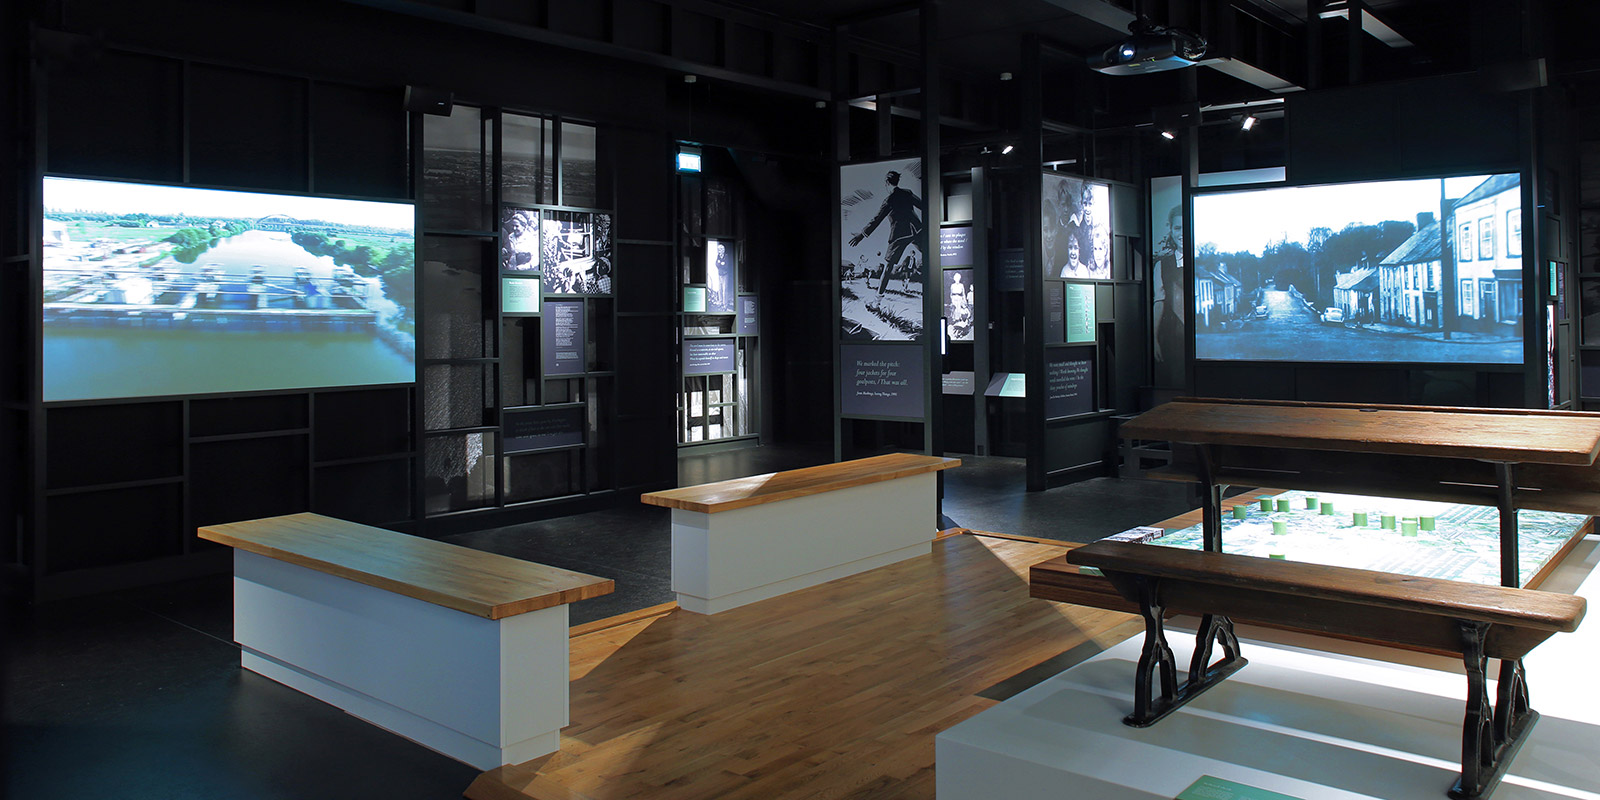 Seamus Heaney Homeplace